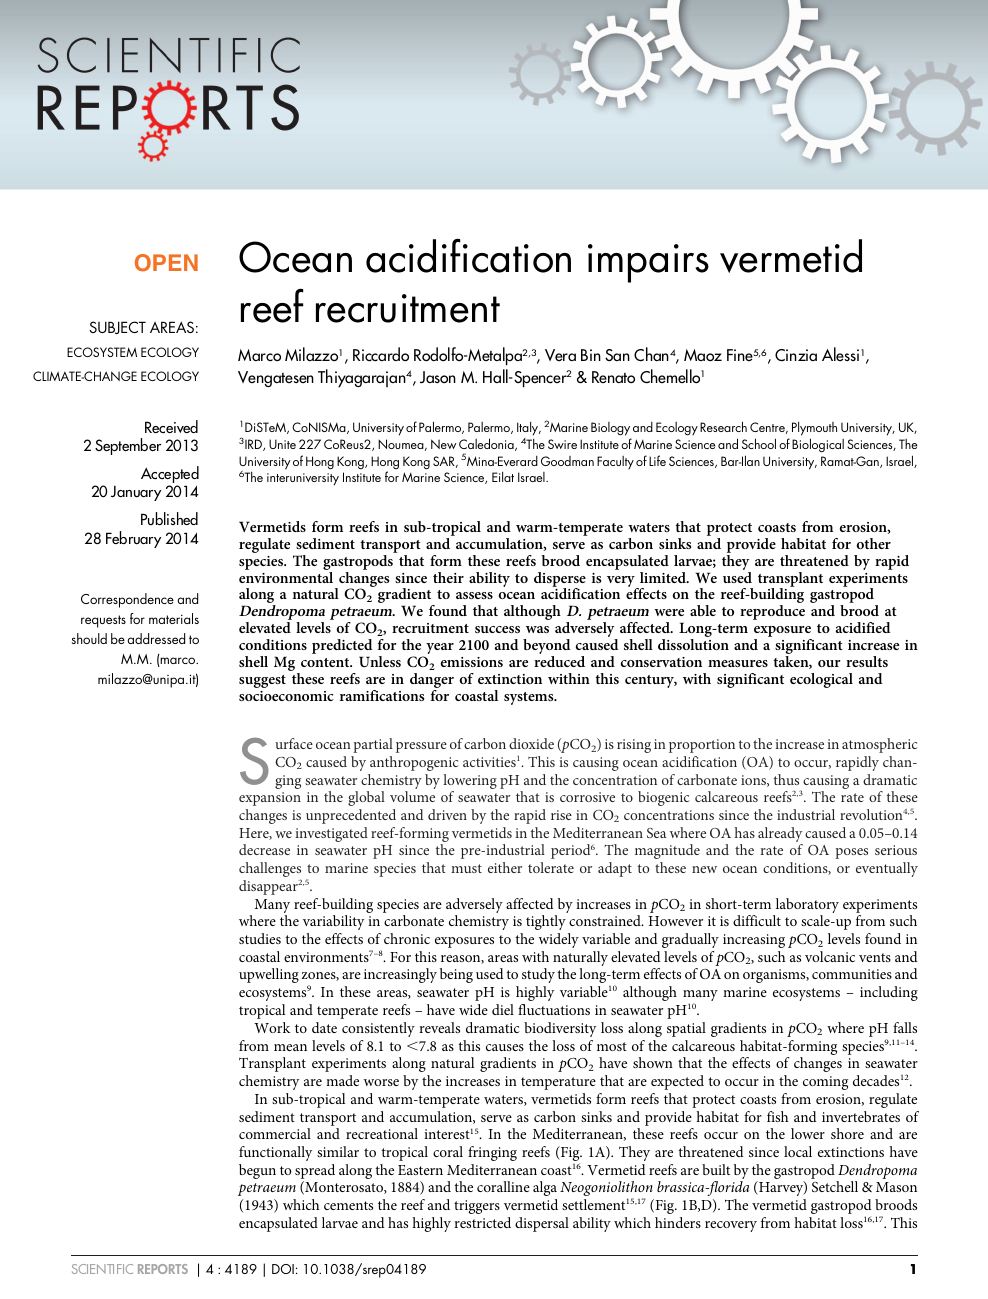 ocean acidification research paper